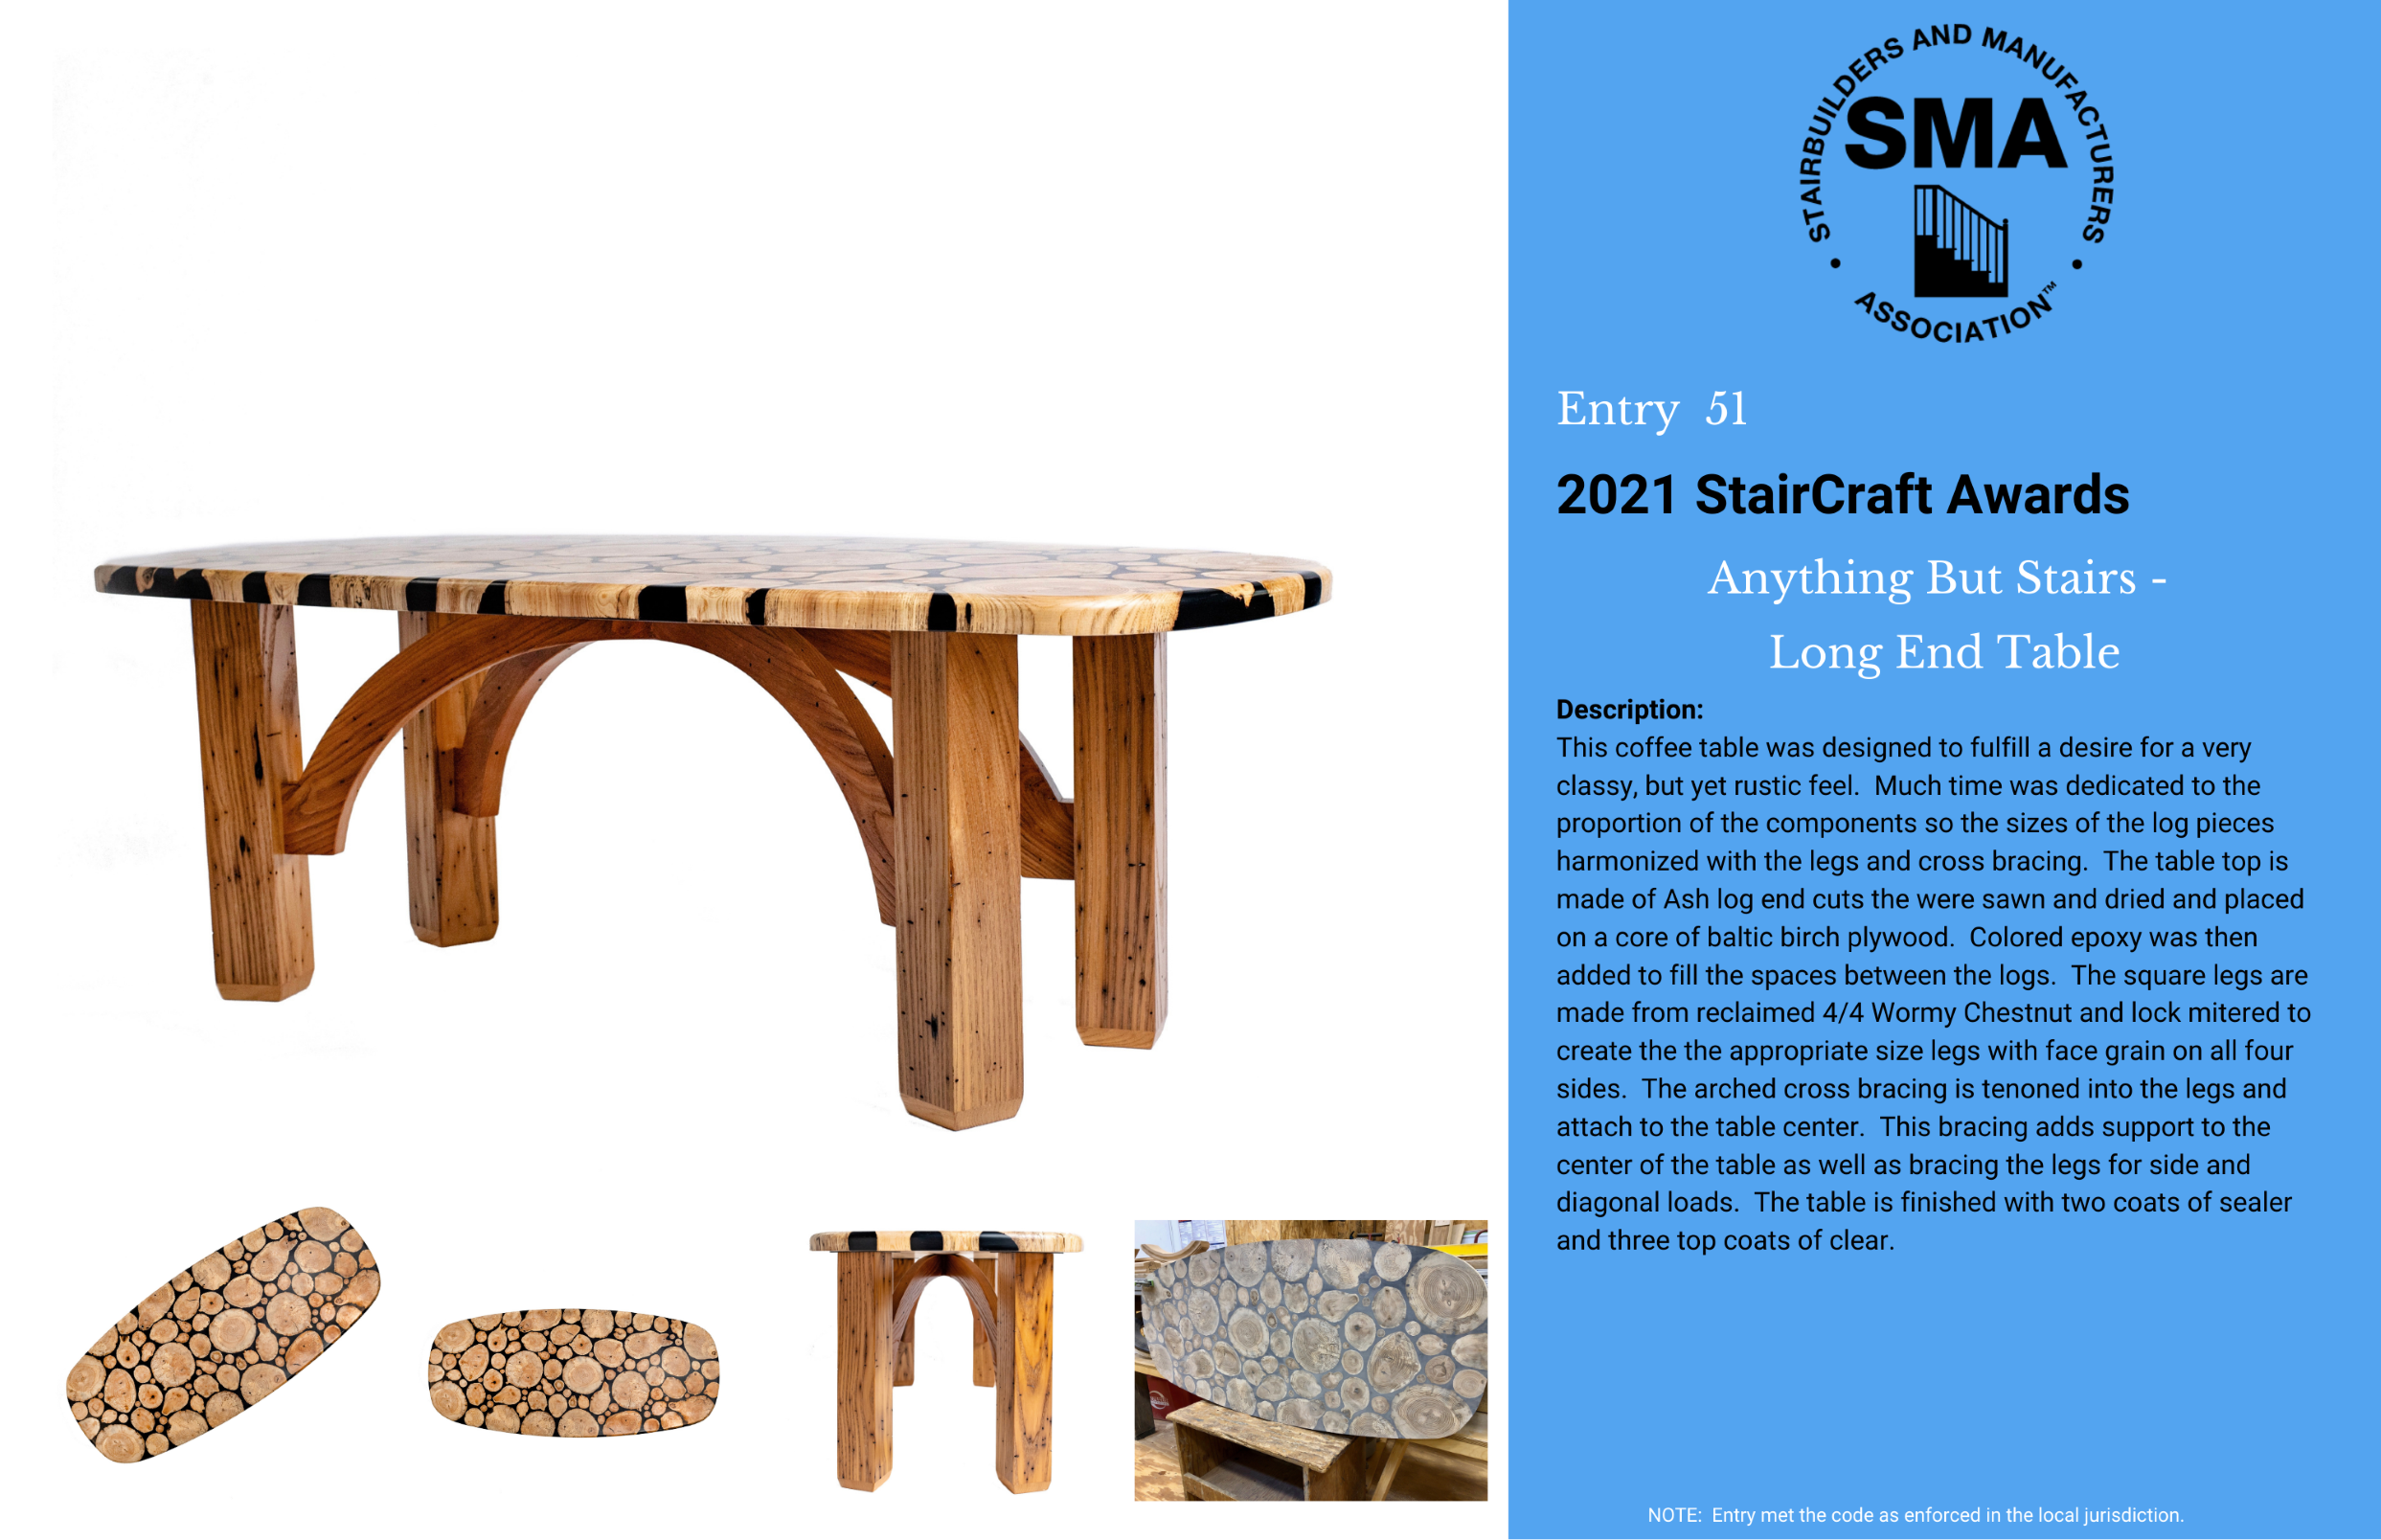 2021 StairCraft Awards Entry 51